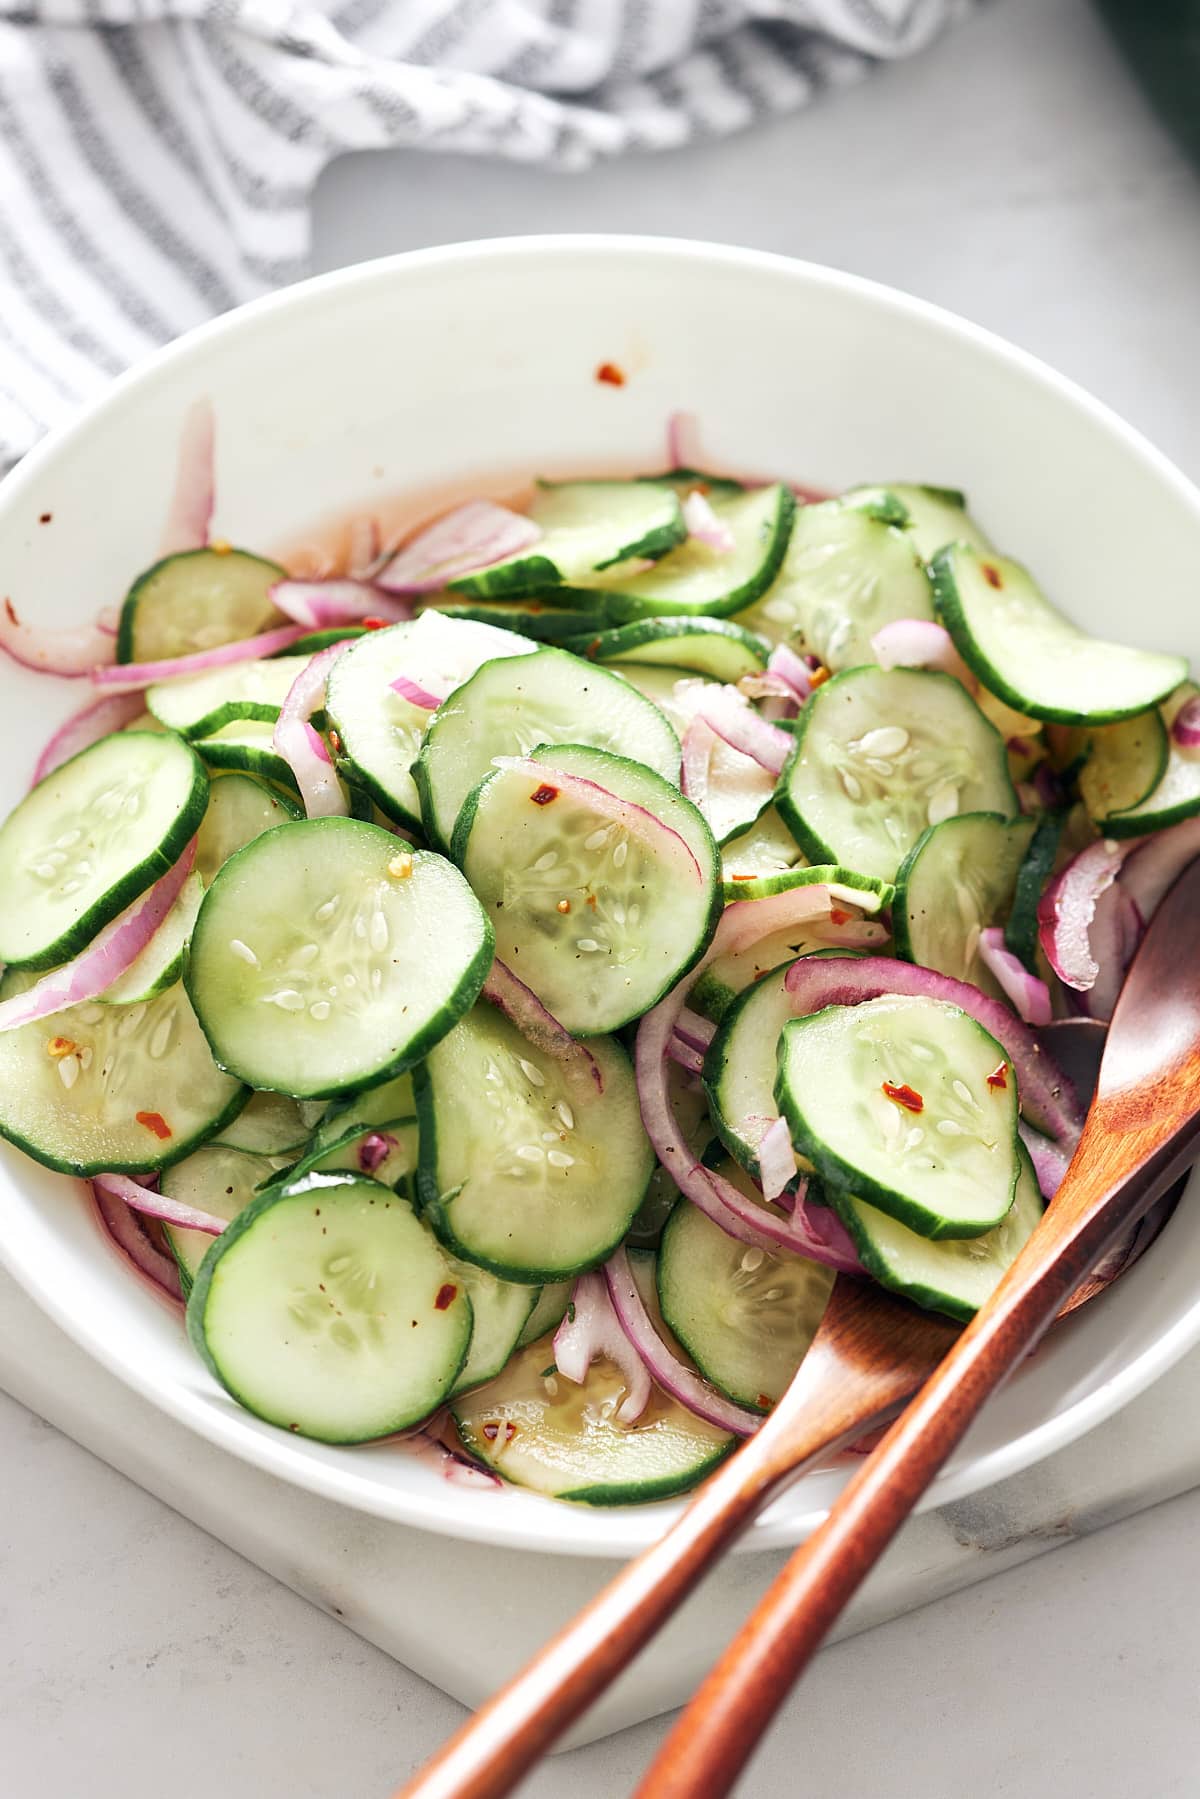 Southern cucumber salad served in a white bowl.